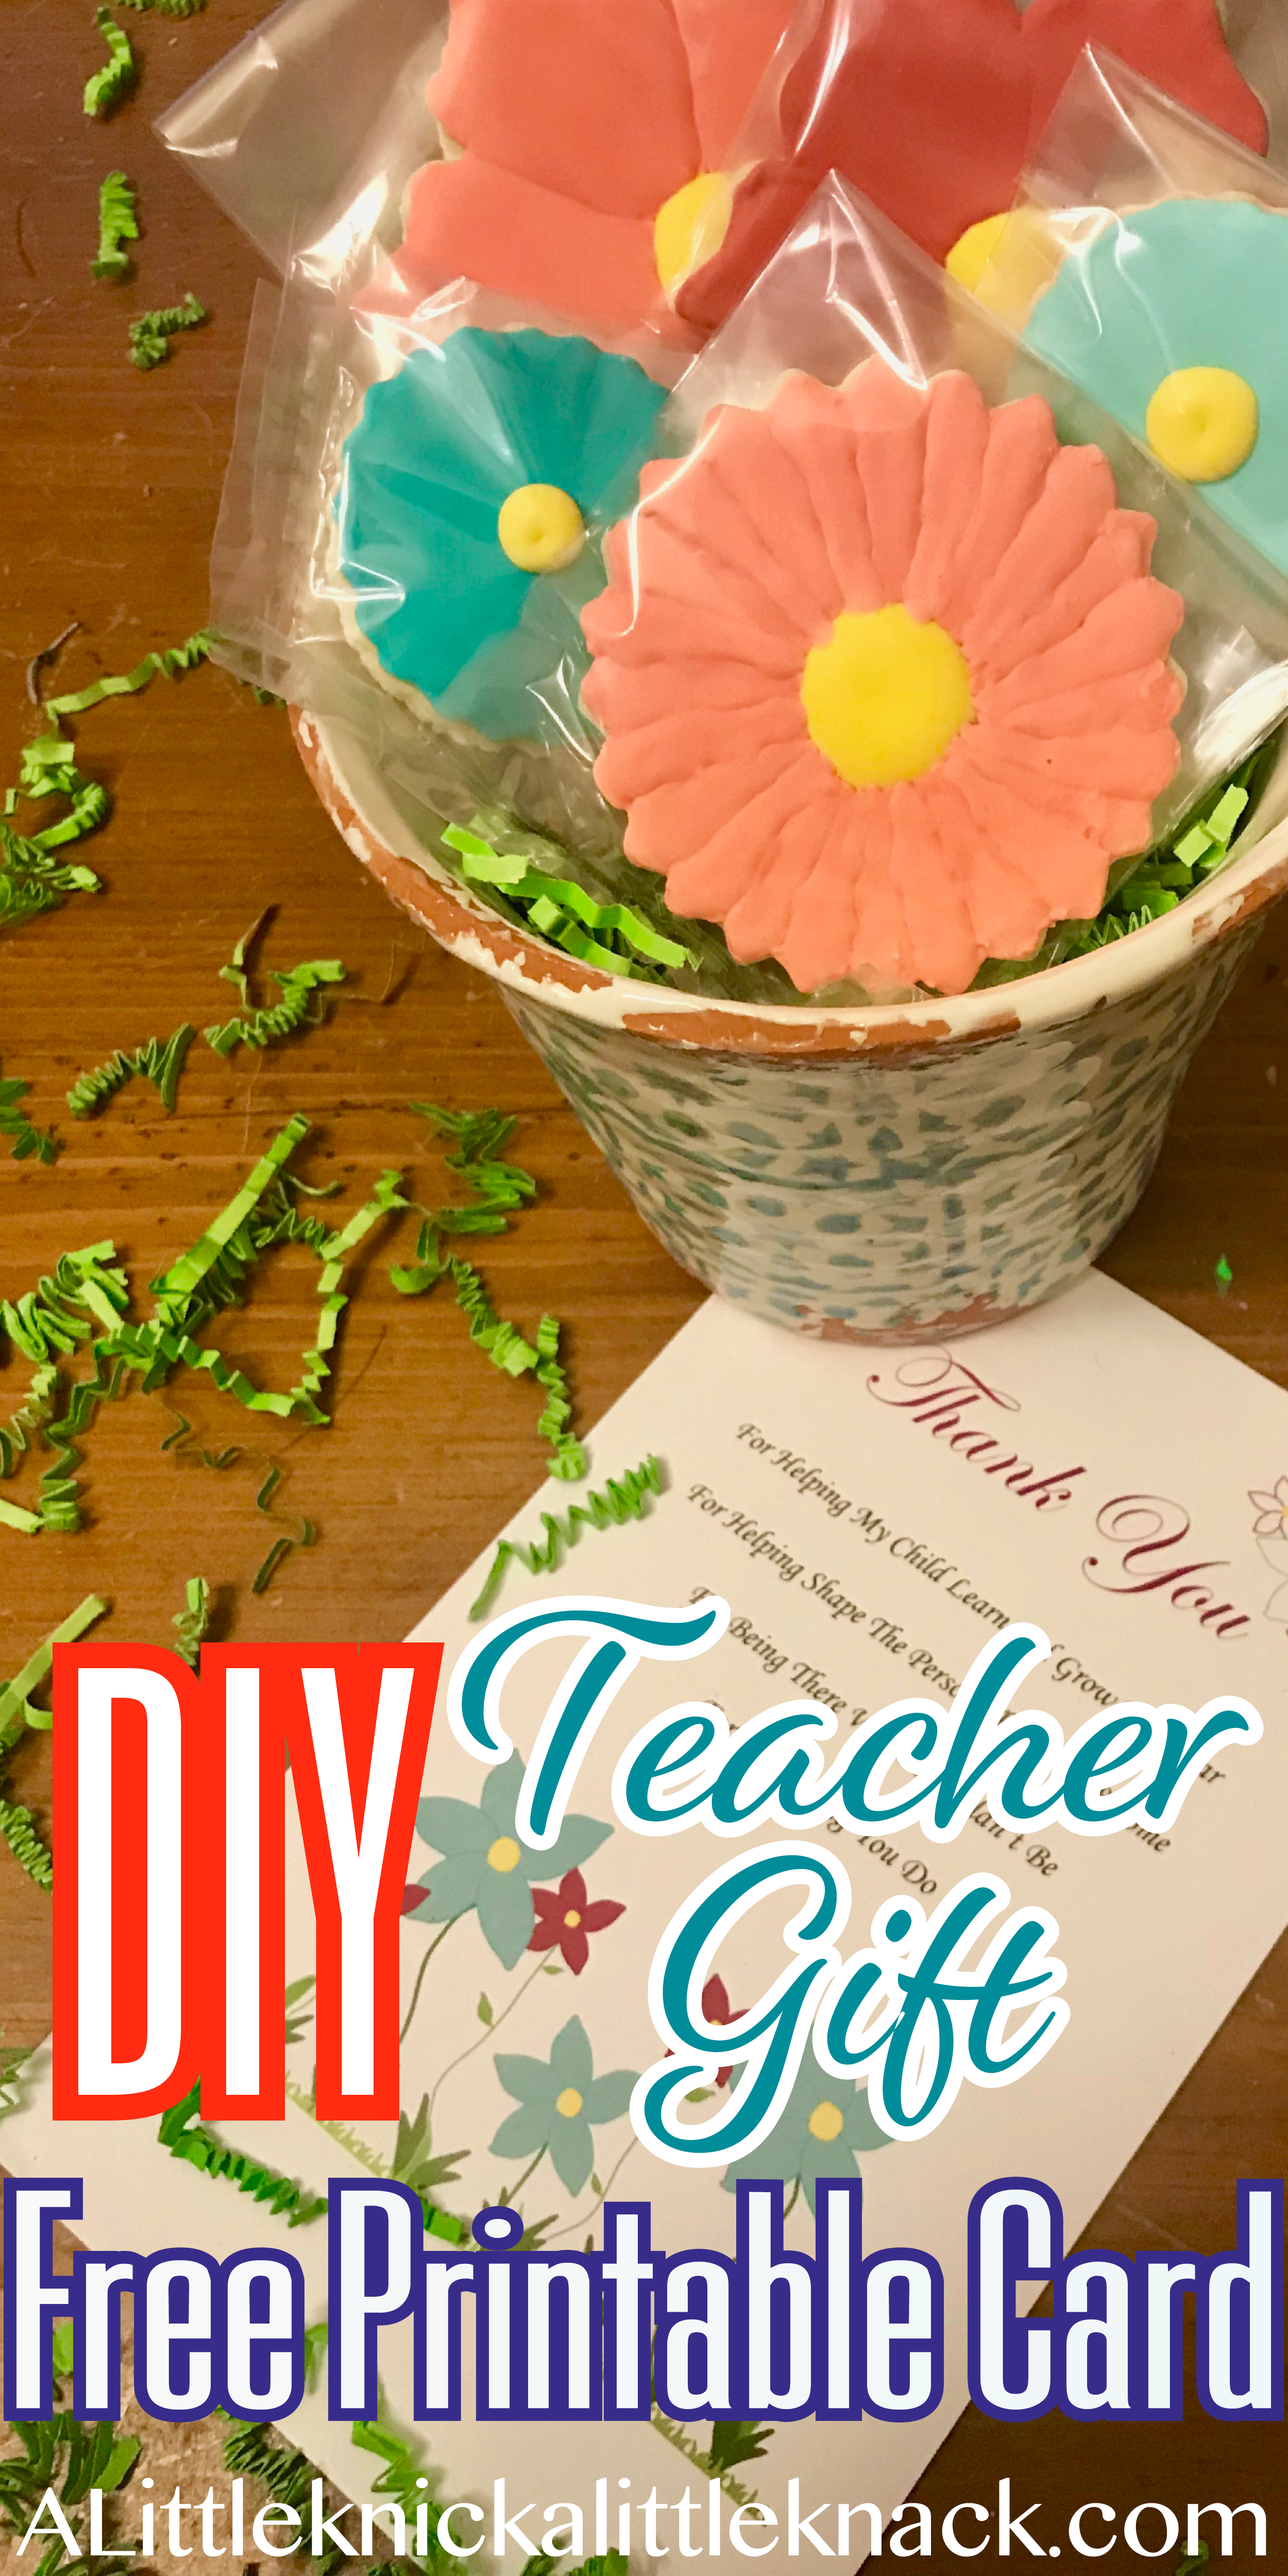 Show your child's teacher you care with this DIY teacher appreciation gift!